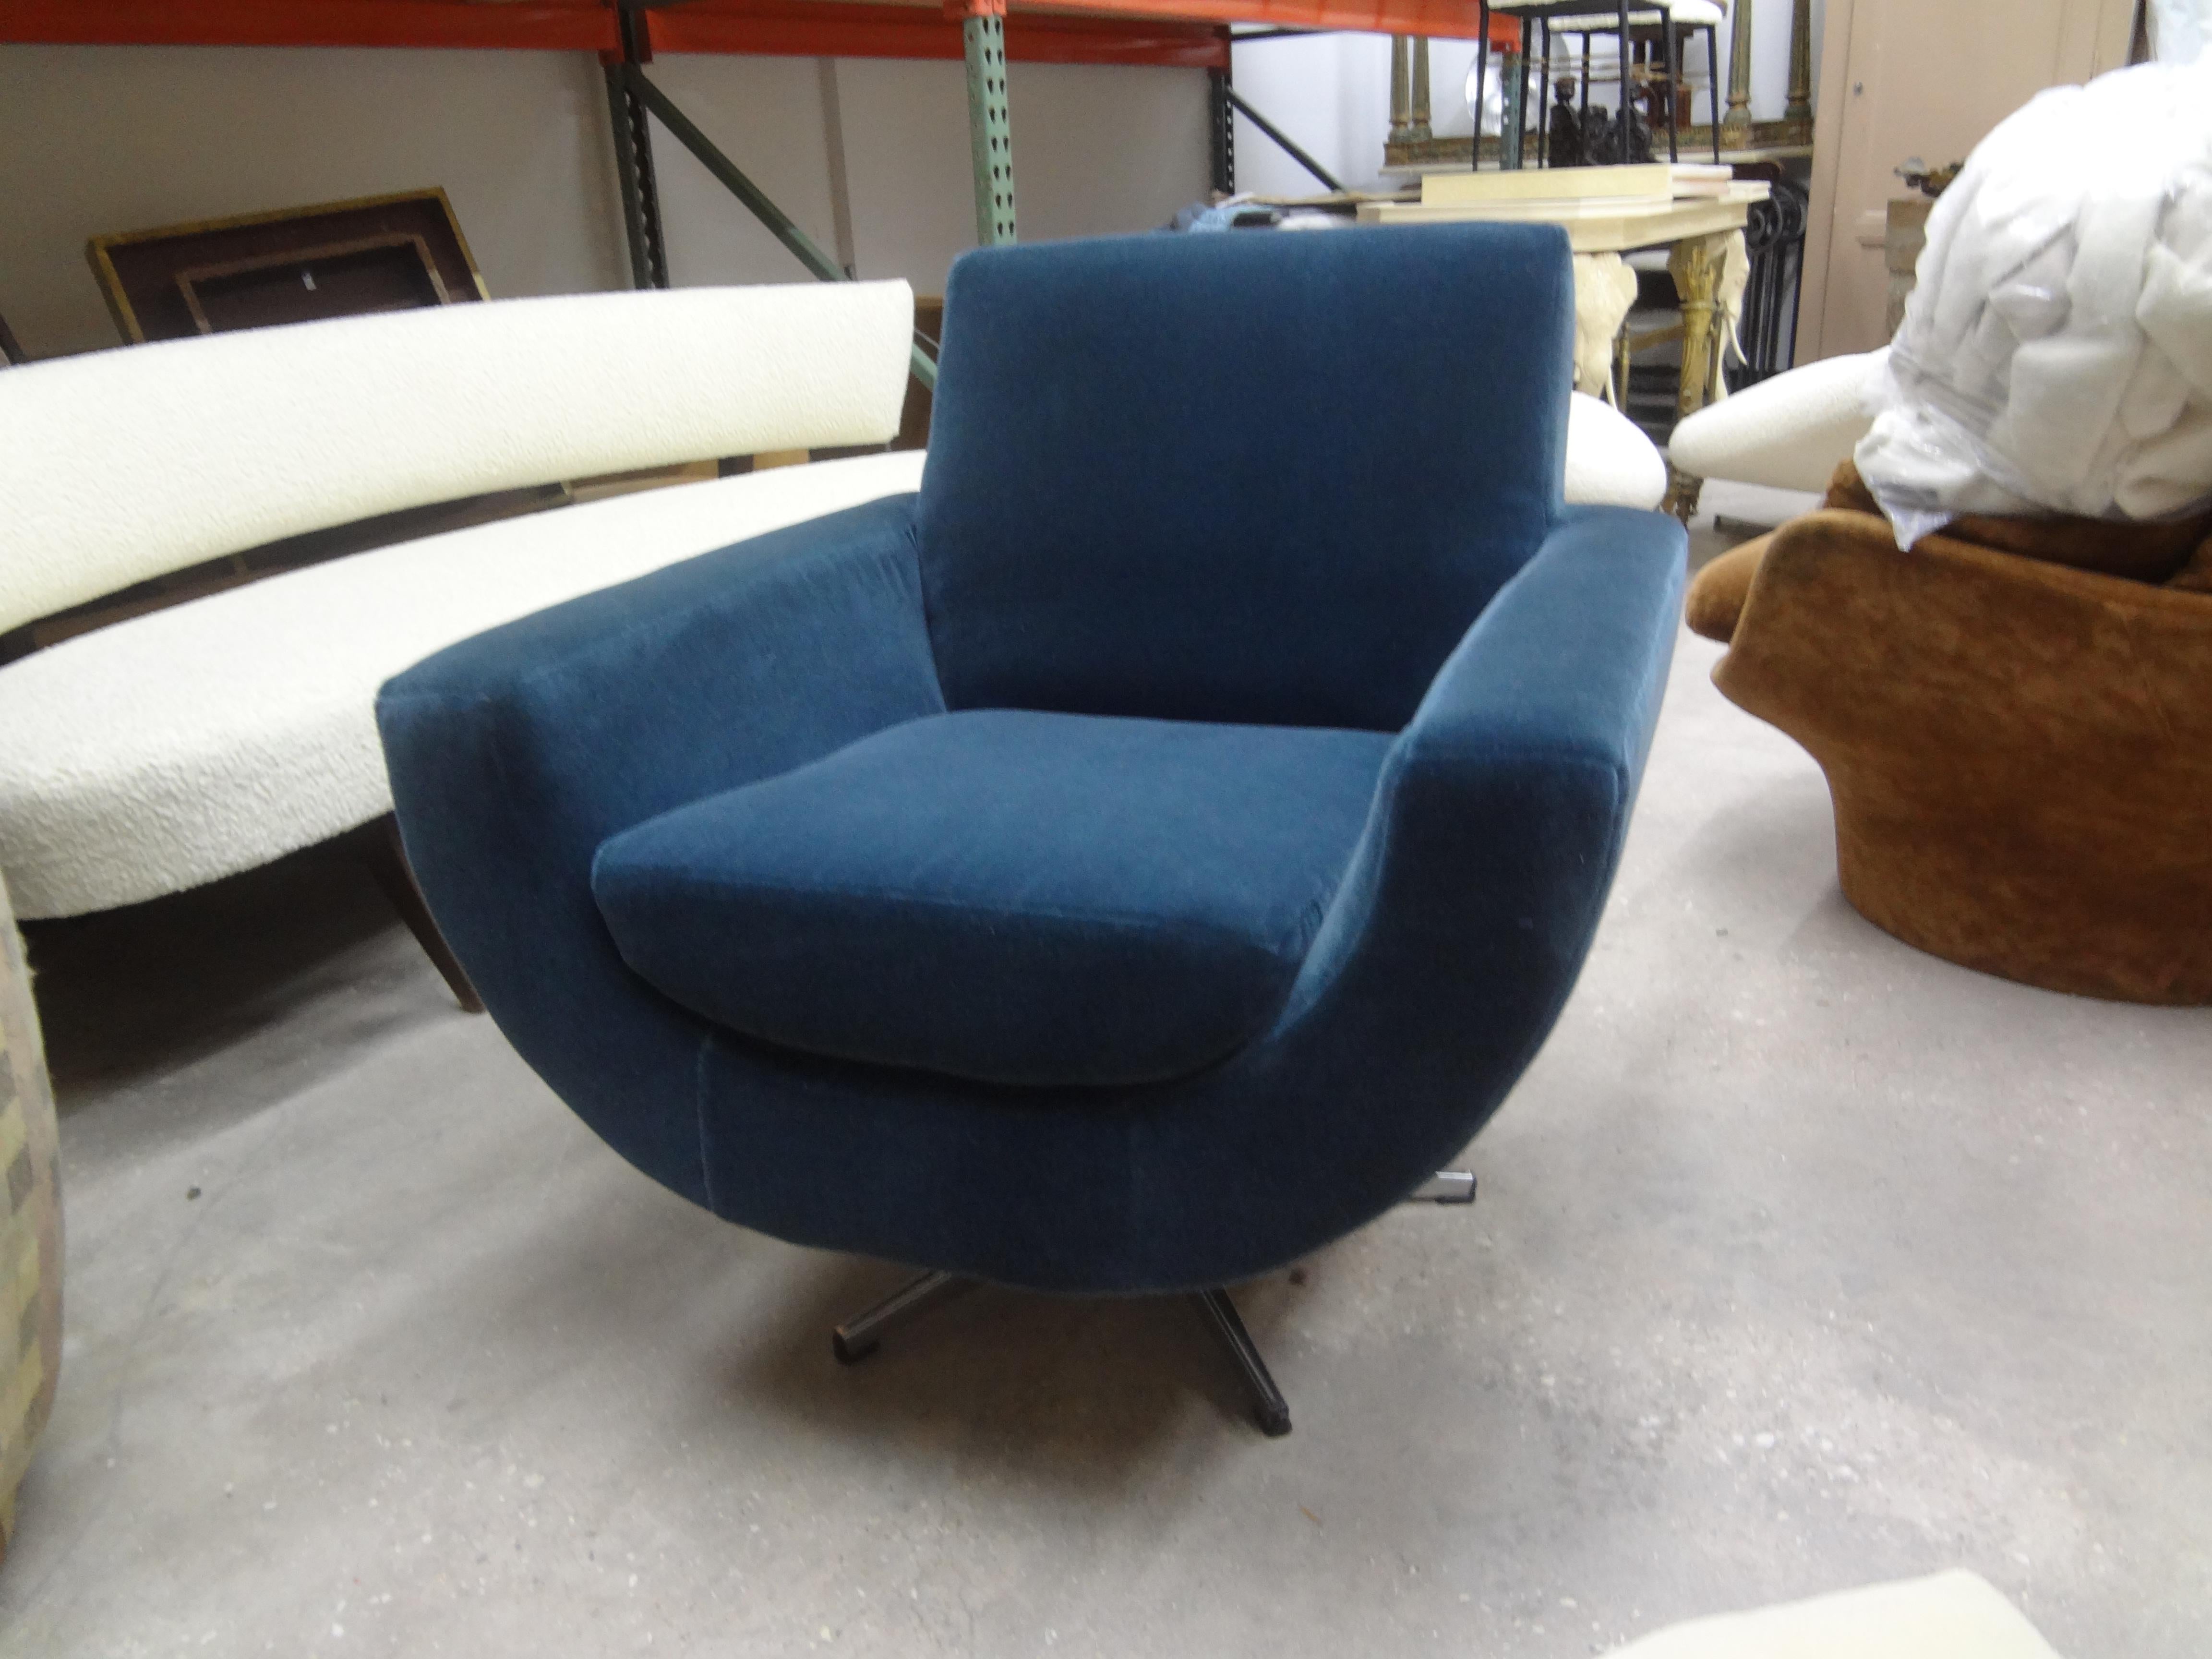 Mid-Century Modern Milo Baughman style swivel chair. This shapely midcentury swivel chair has been newly upholstered in a beautiful steel blue mohair fabric.
Comfortable and stunning from every angle!